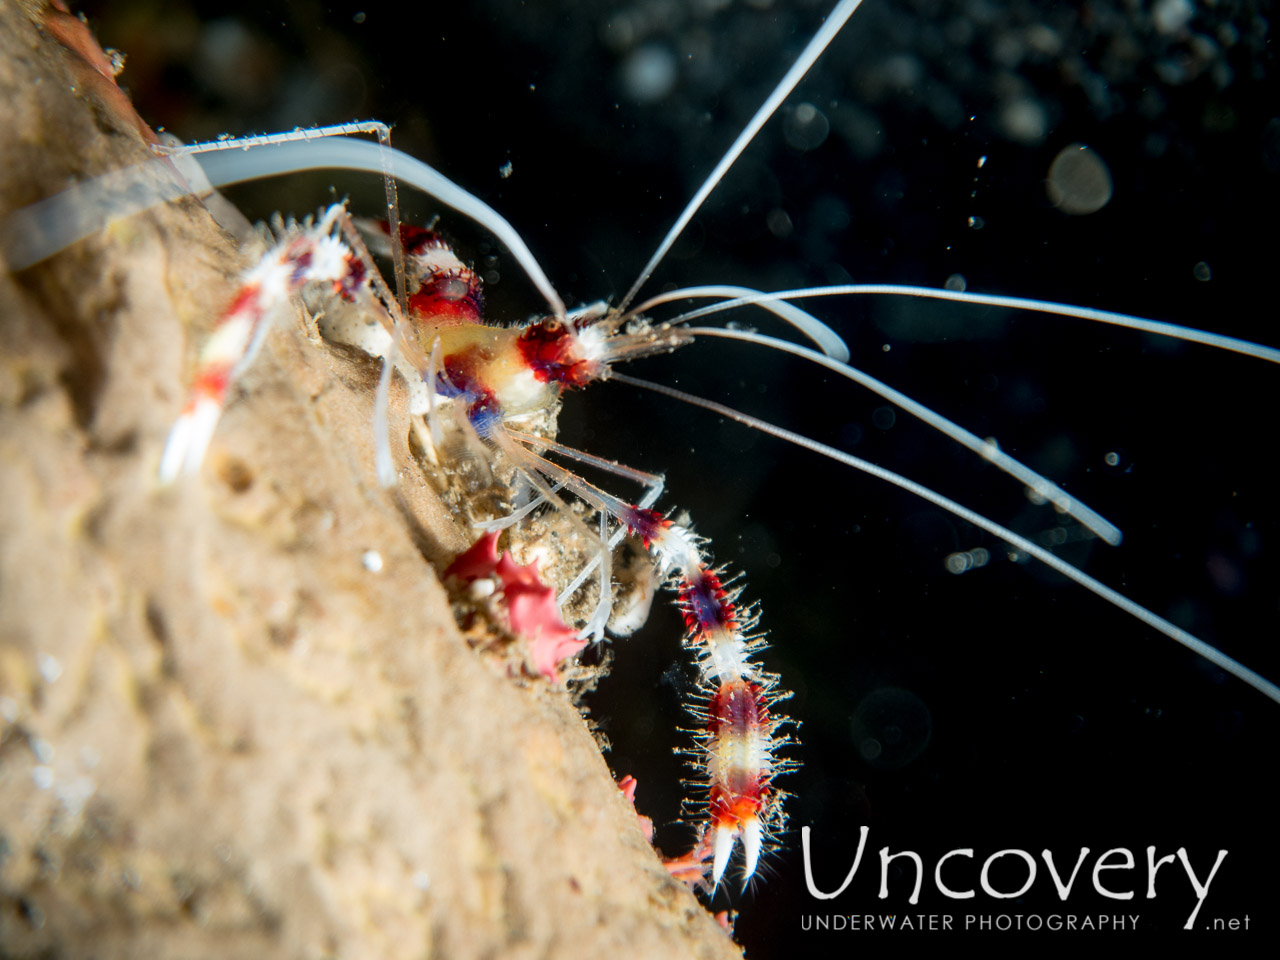 Banded Coral Shrimp (stenopus Hispidus), photo taken in Indonesia, North Sulawesi, Lembeh Strait, Aer Bajo 1